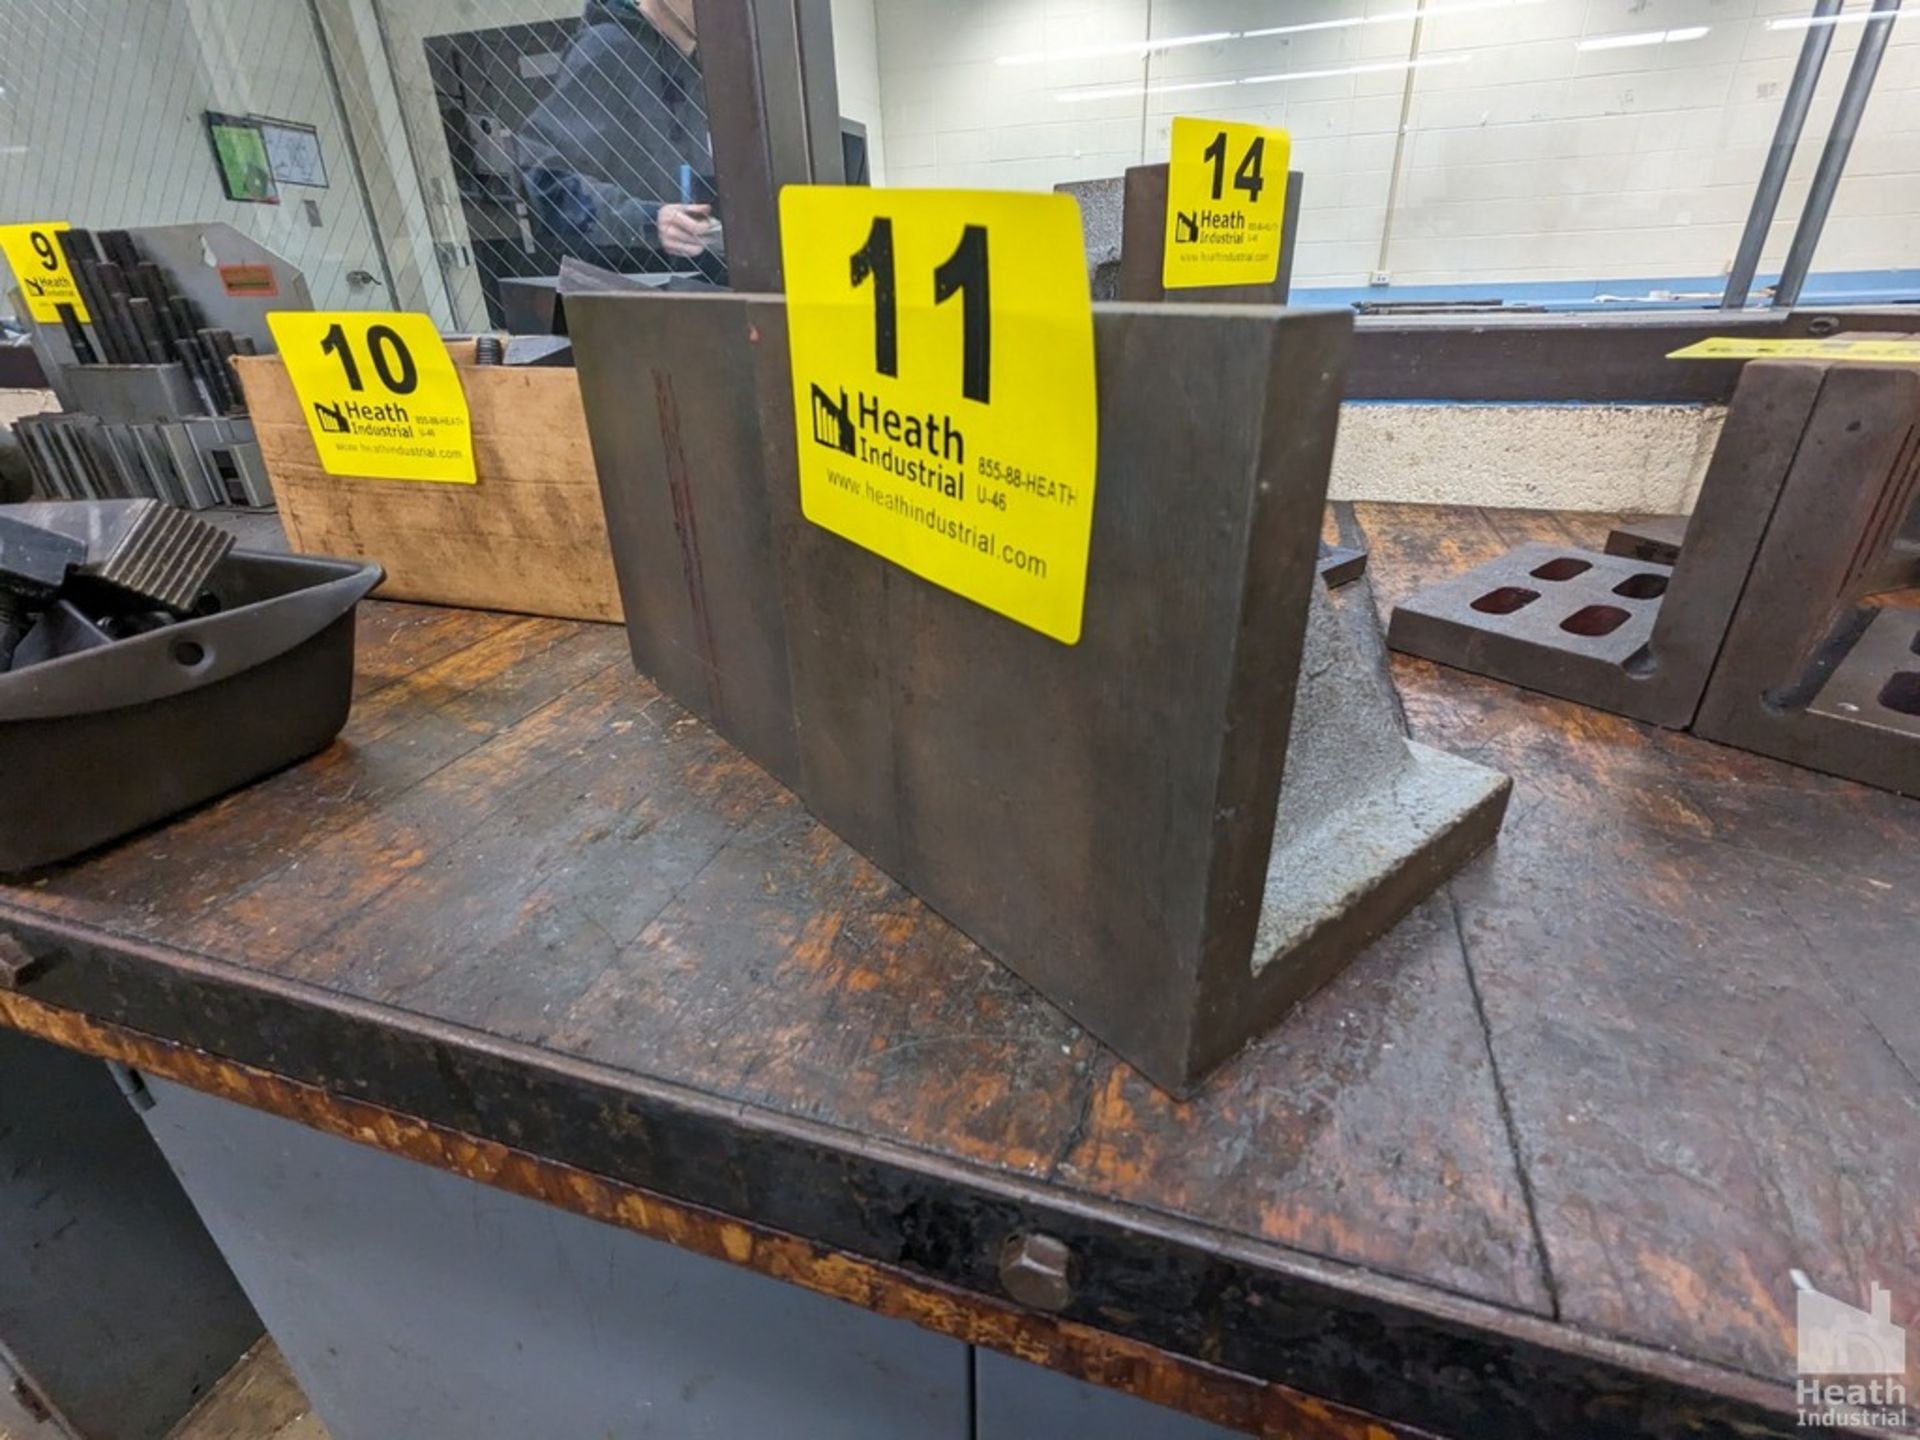 (2) 6" X 6" X 6" RIGHT ANGLE PLATES Free Pickup In Hoffman Estates, Illinois